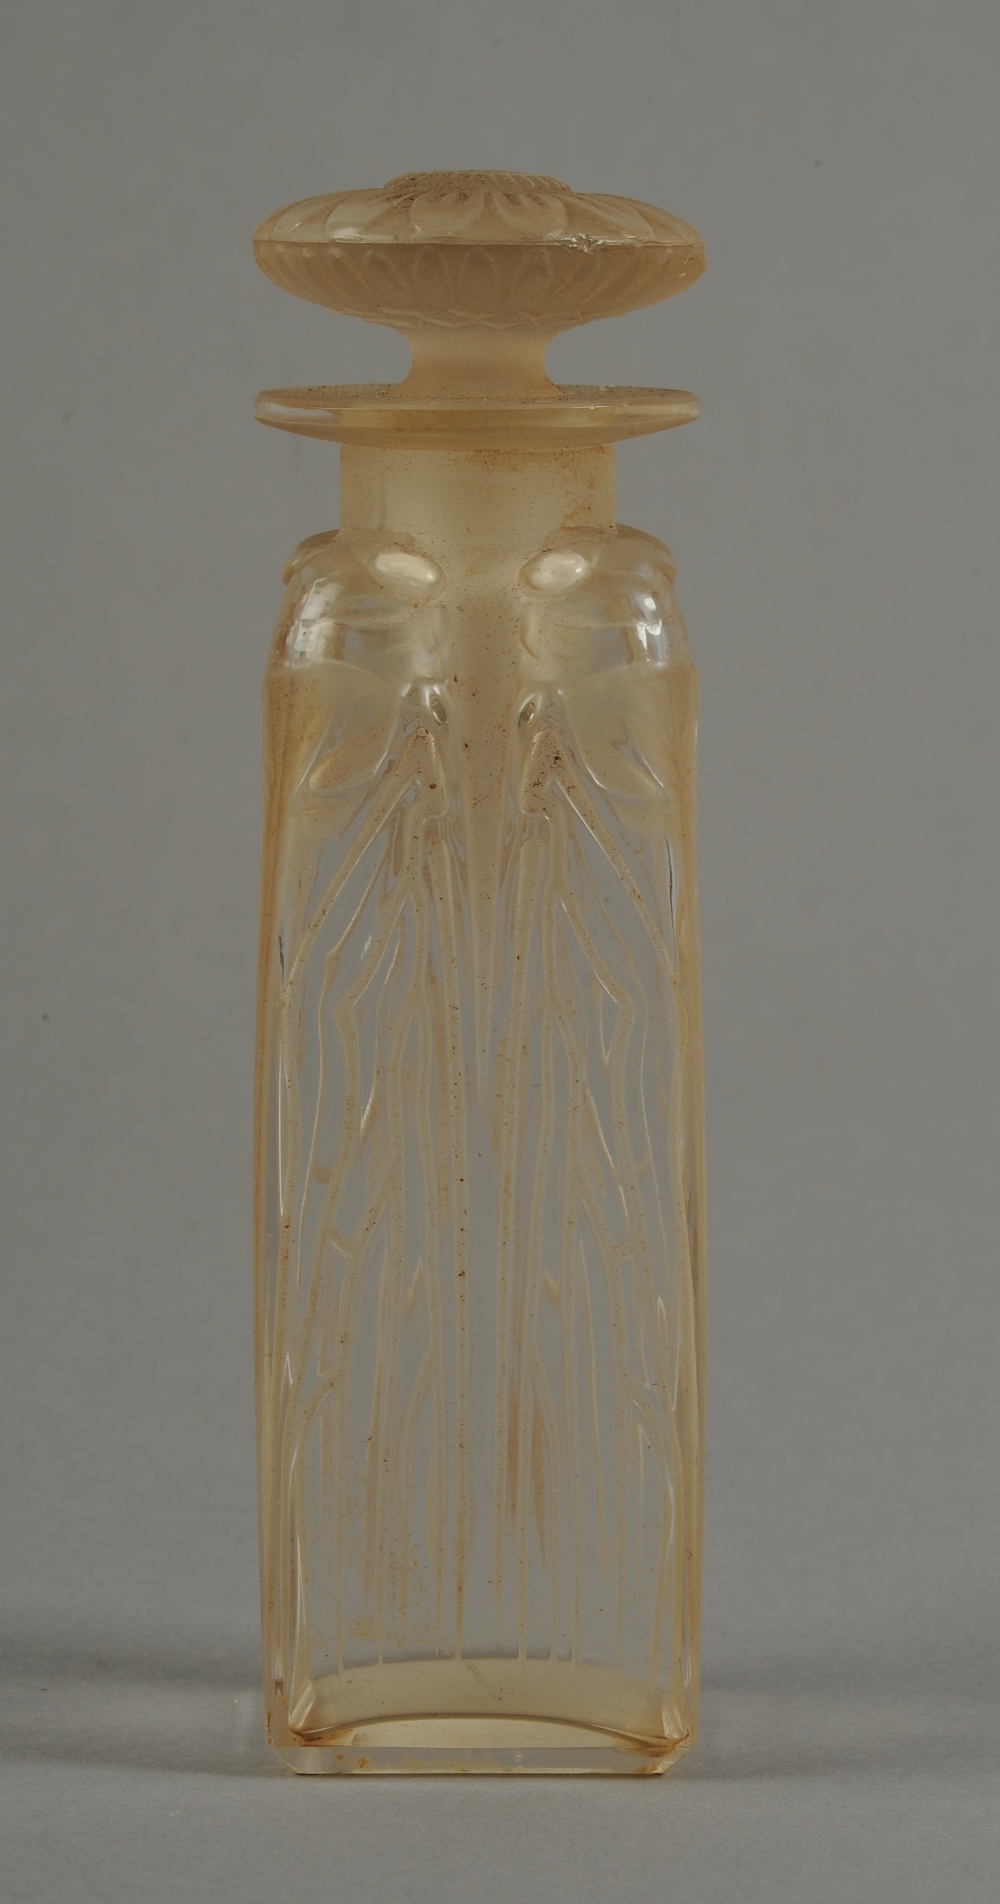 A LALIQUE 'QUATRE CIGALES' PATTERN SCENT BOTTLE AND STOPPER, of square section, moulded with